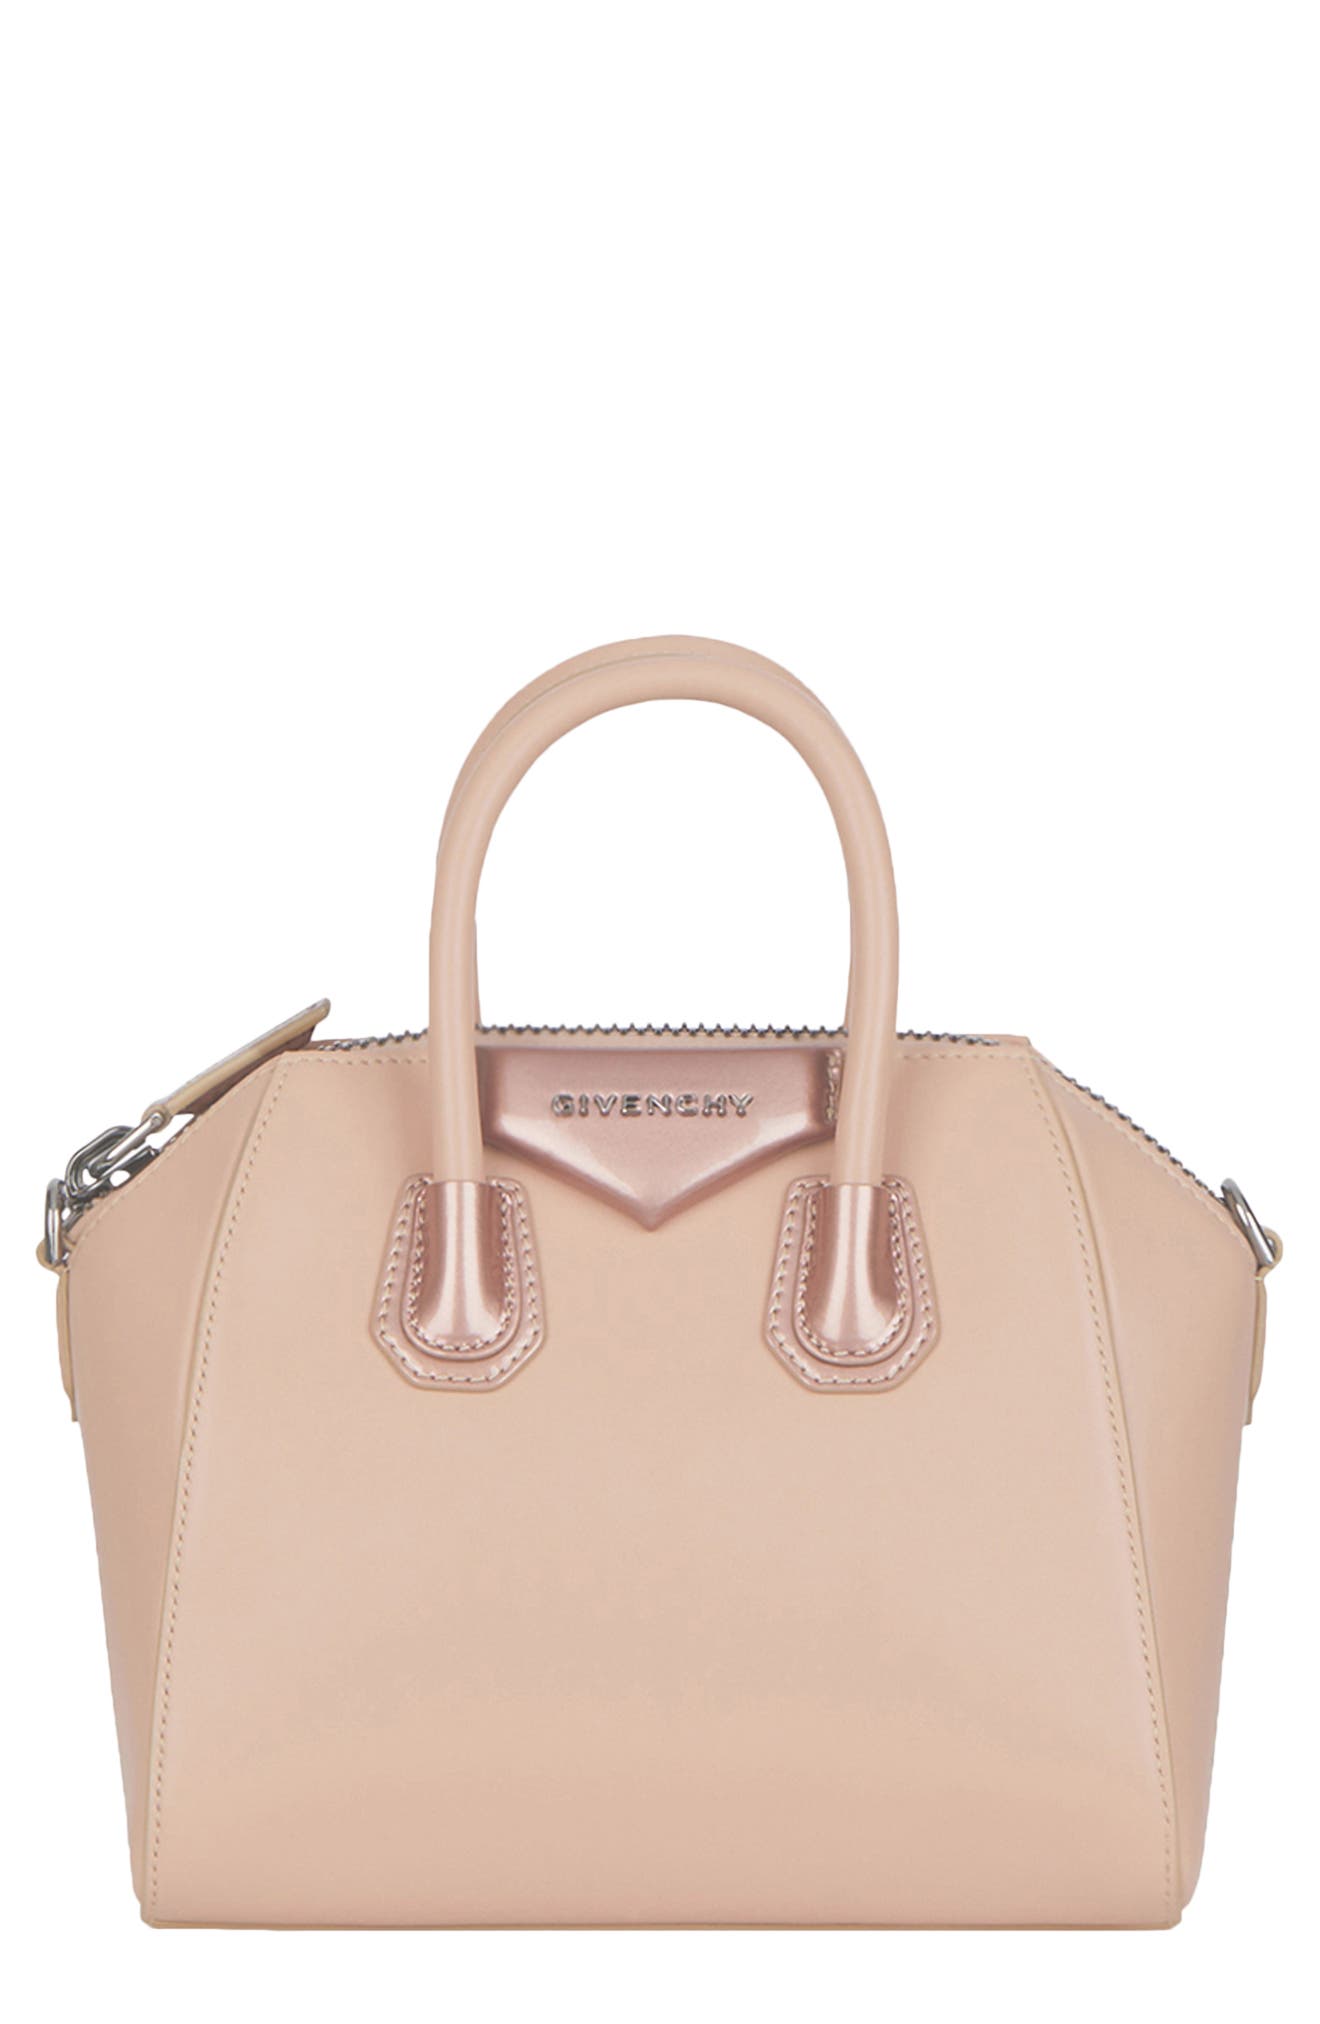 givenchy bags on sale